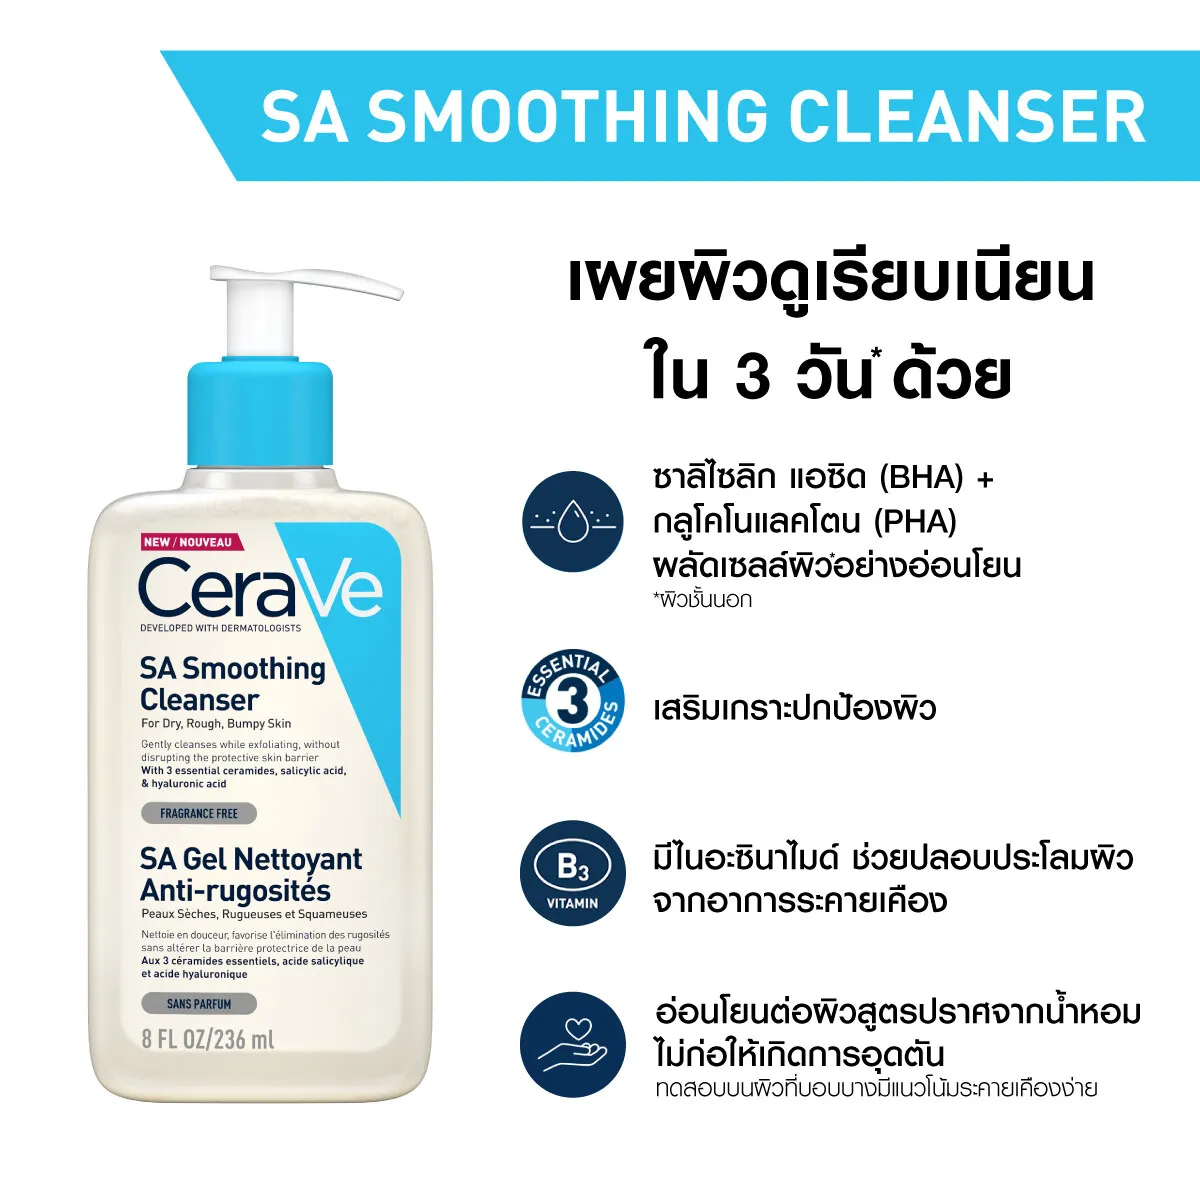 Smoothing cleanser. Цераве sa Smoothing Cleanser. CERAVE Hydrating facial Cleanser 236 ml. CERAVE sa Smoothing Cleanser ad. Sa Smoothing Cleanser CERAVE hands.